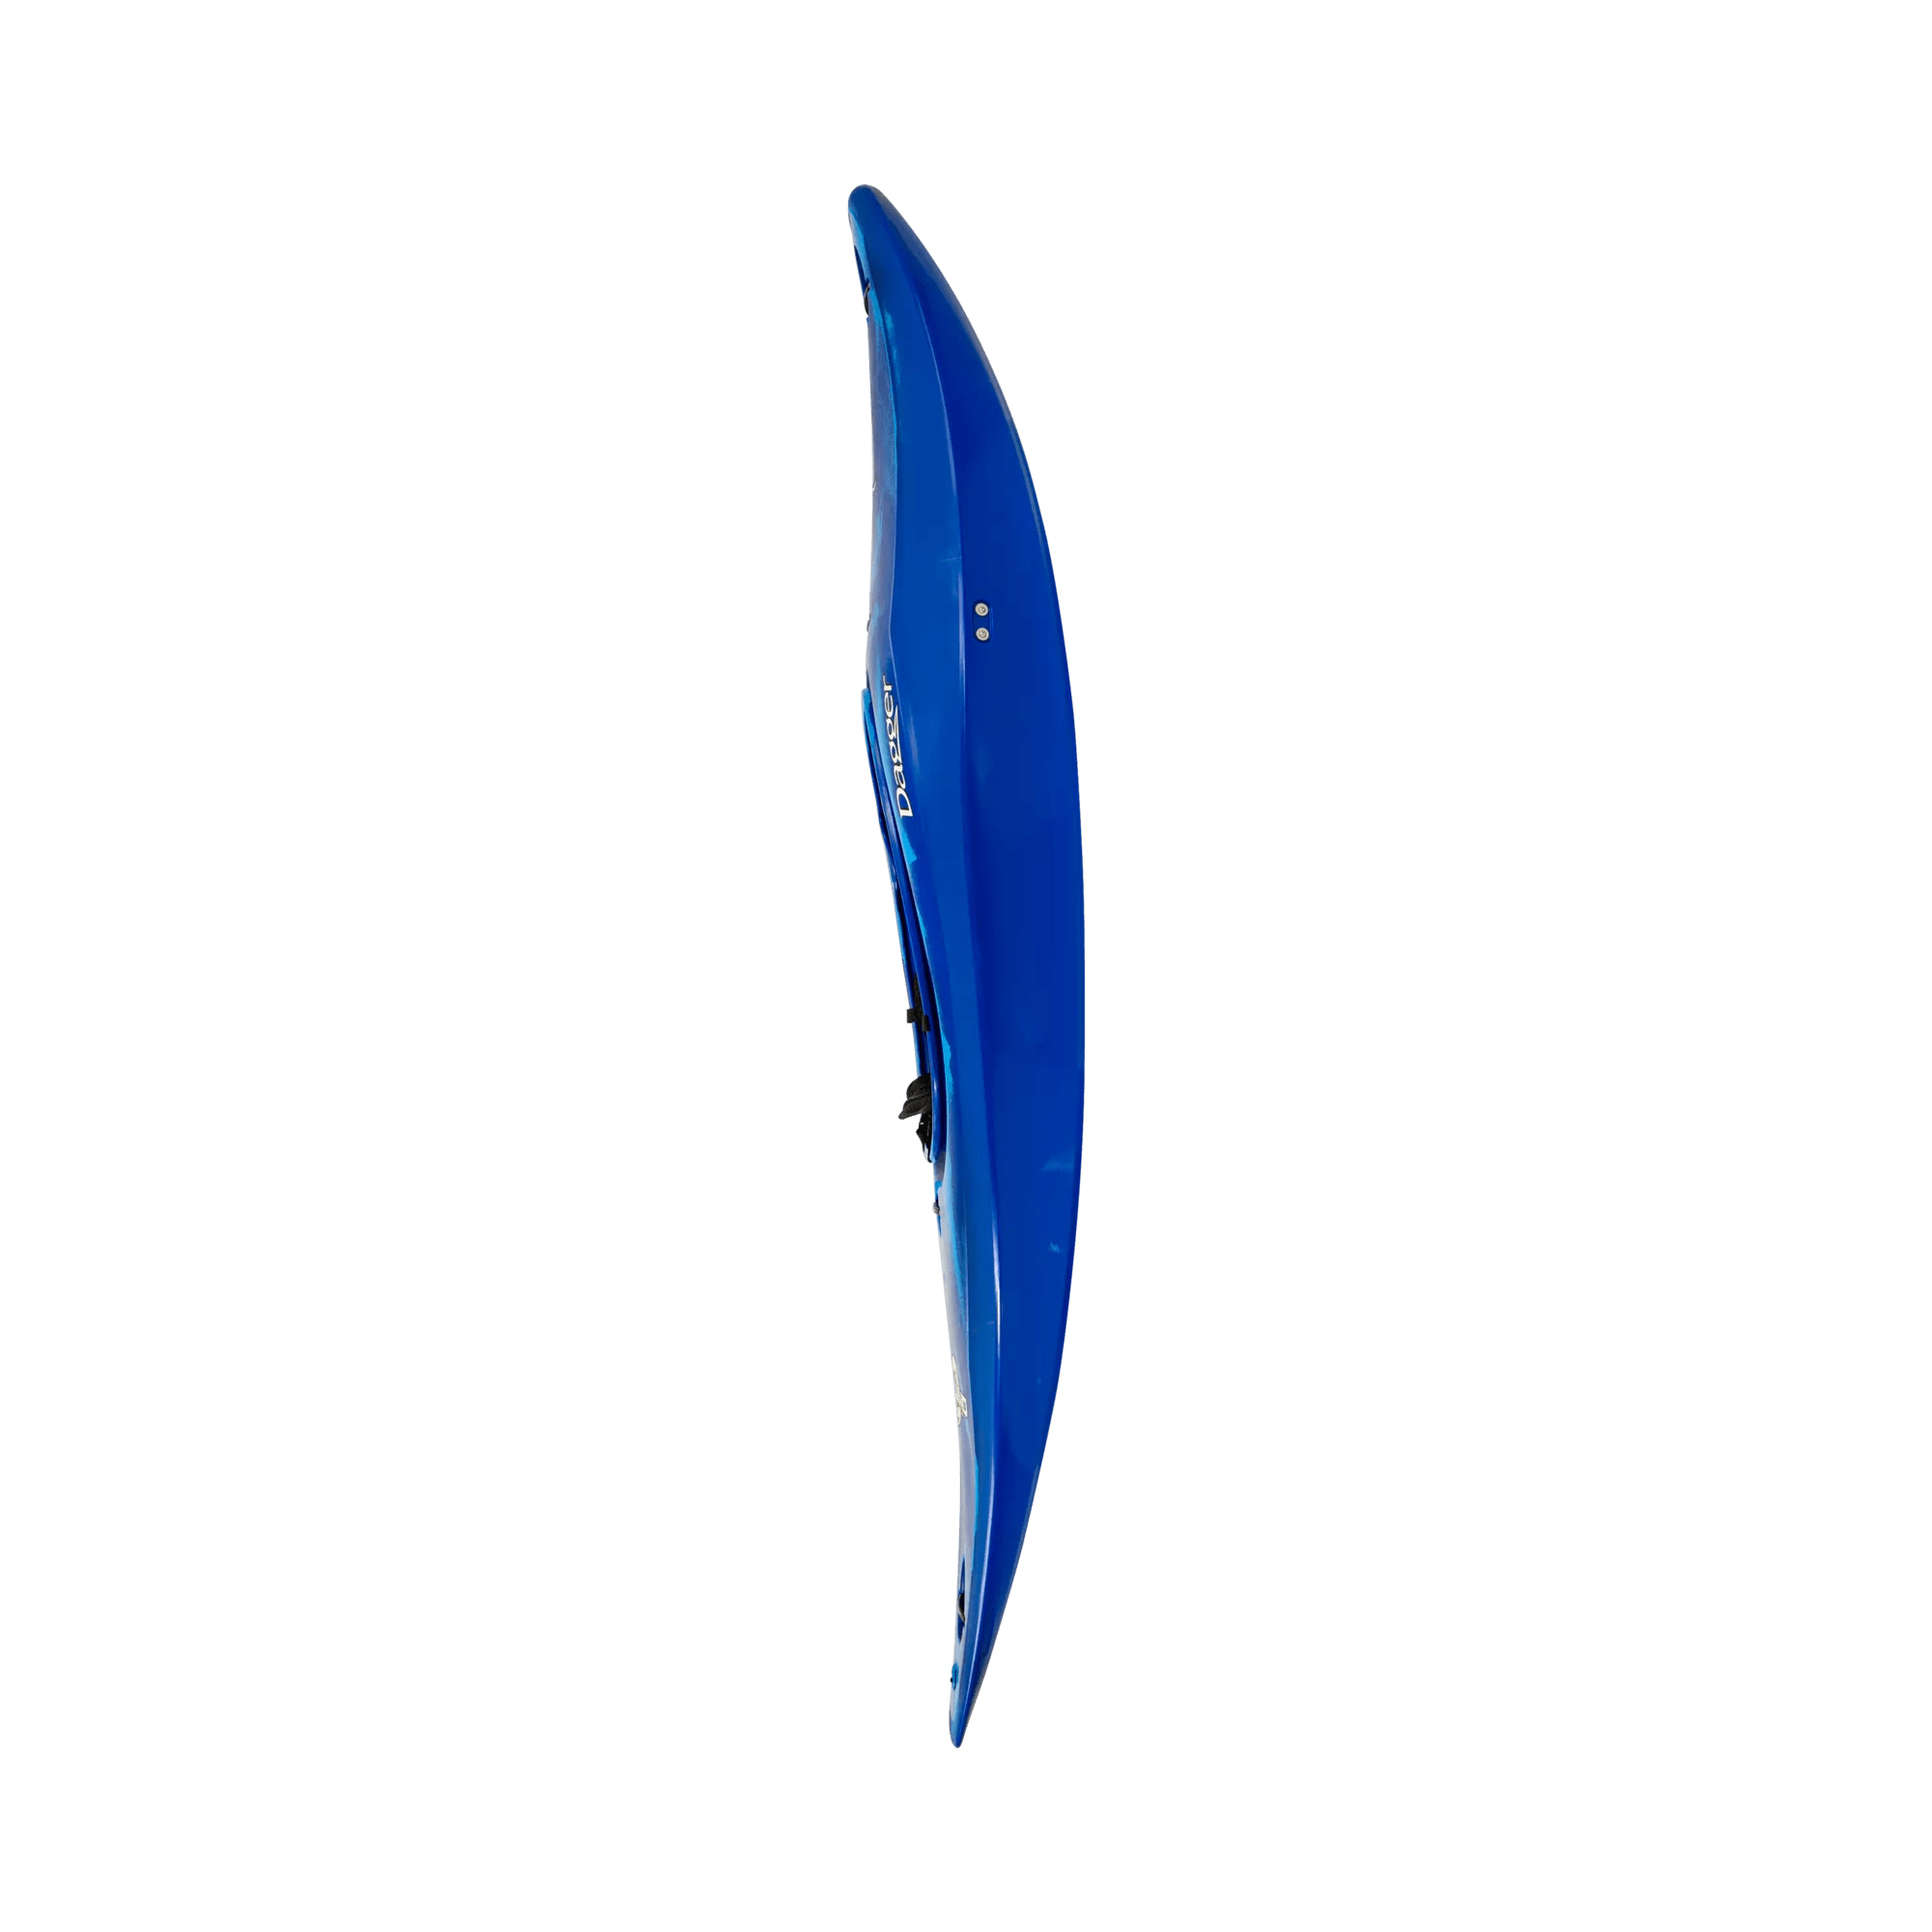 DAGGER - Rewind MD River Play Whitewater Kayak - Blue - 9010344206 - SIDE